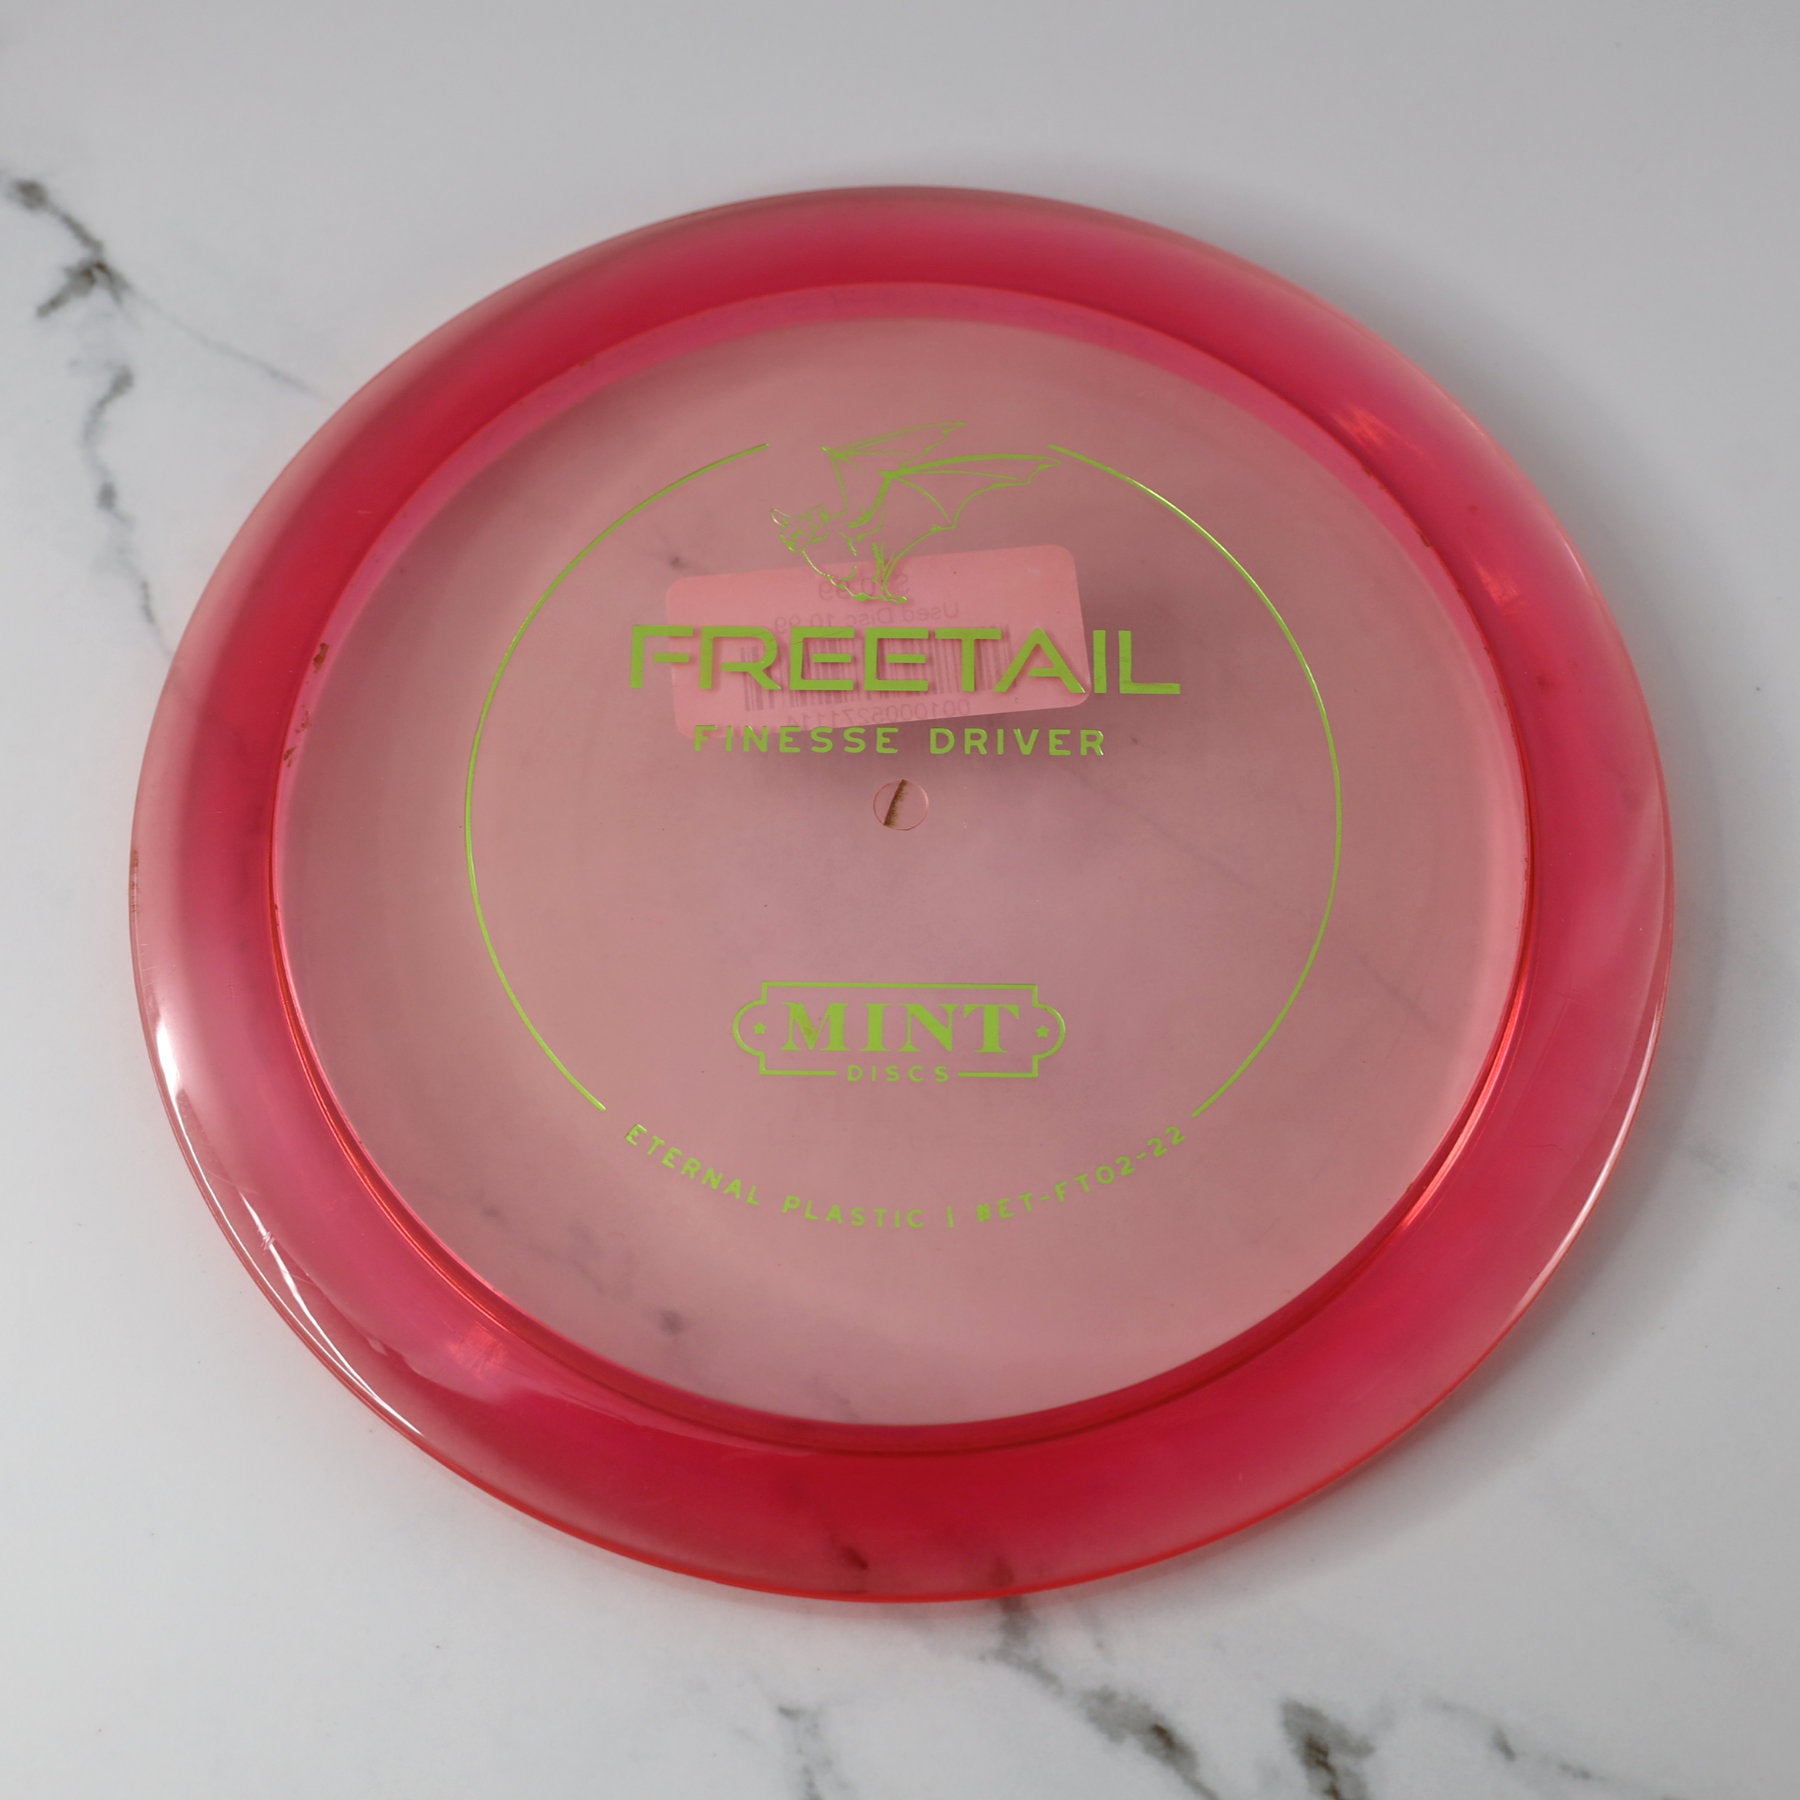 Used Mint Eternal Freetail